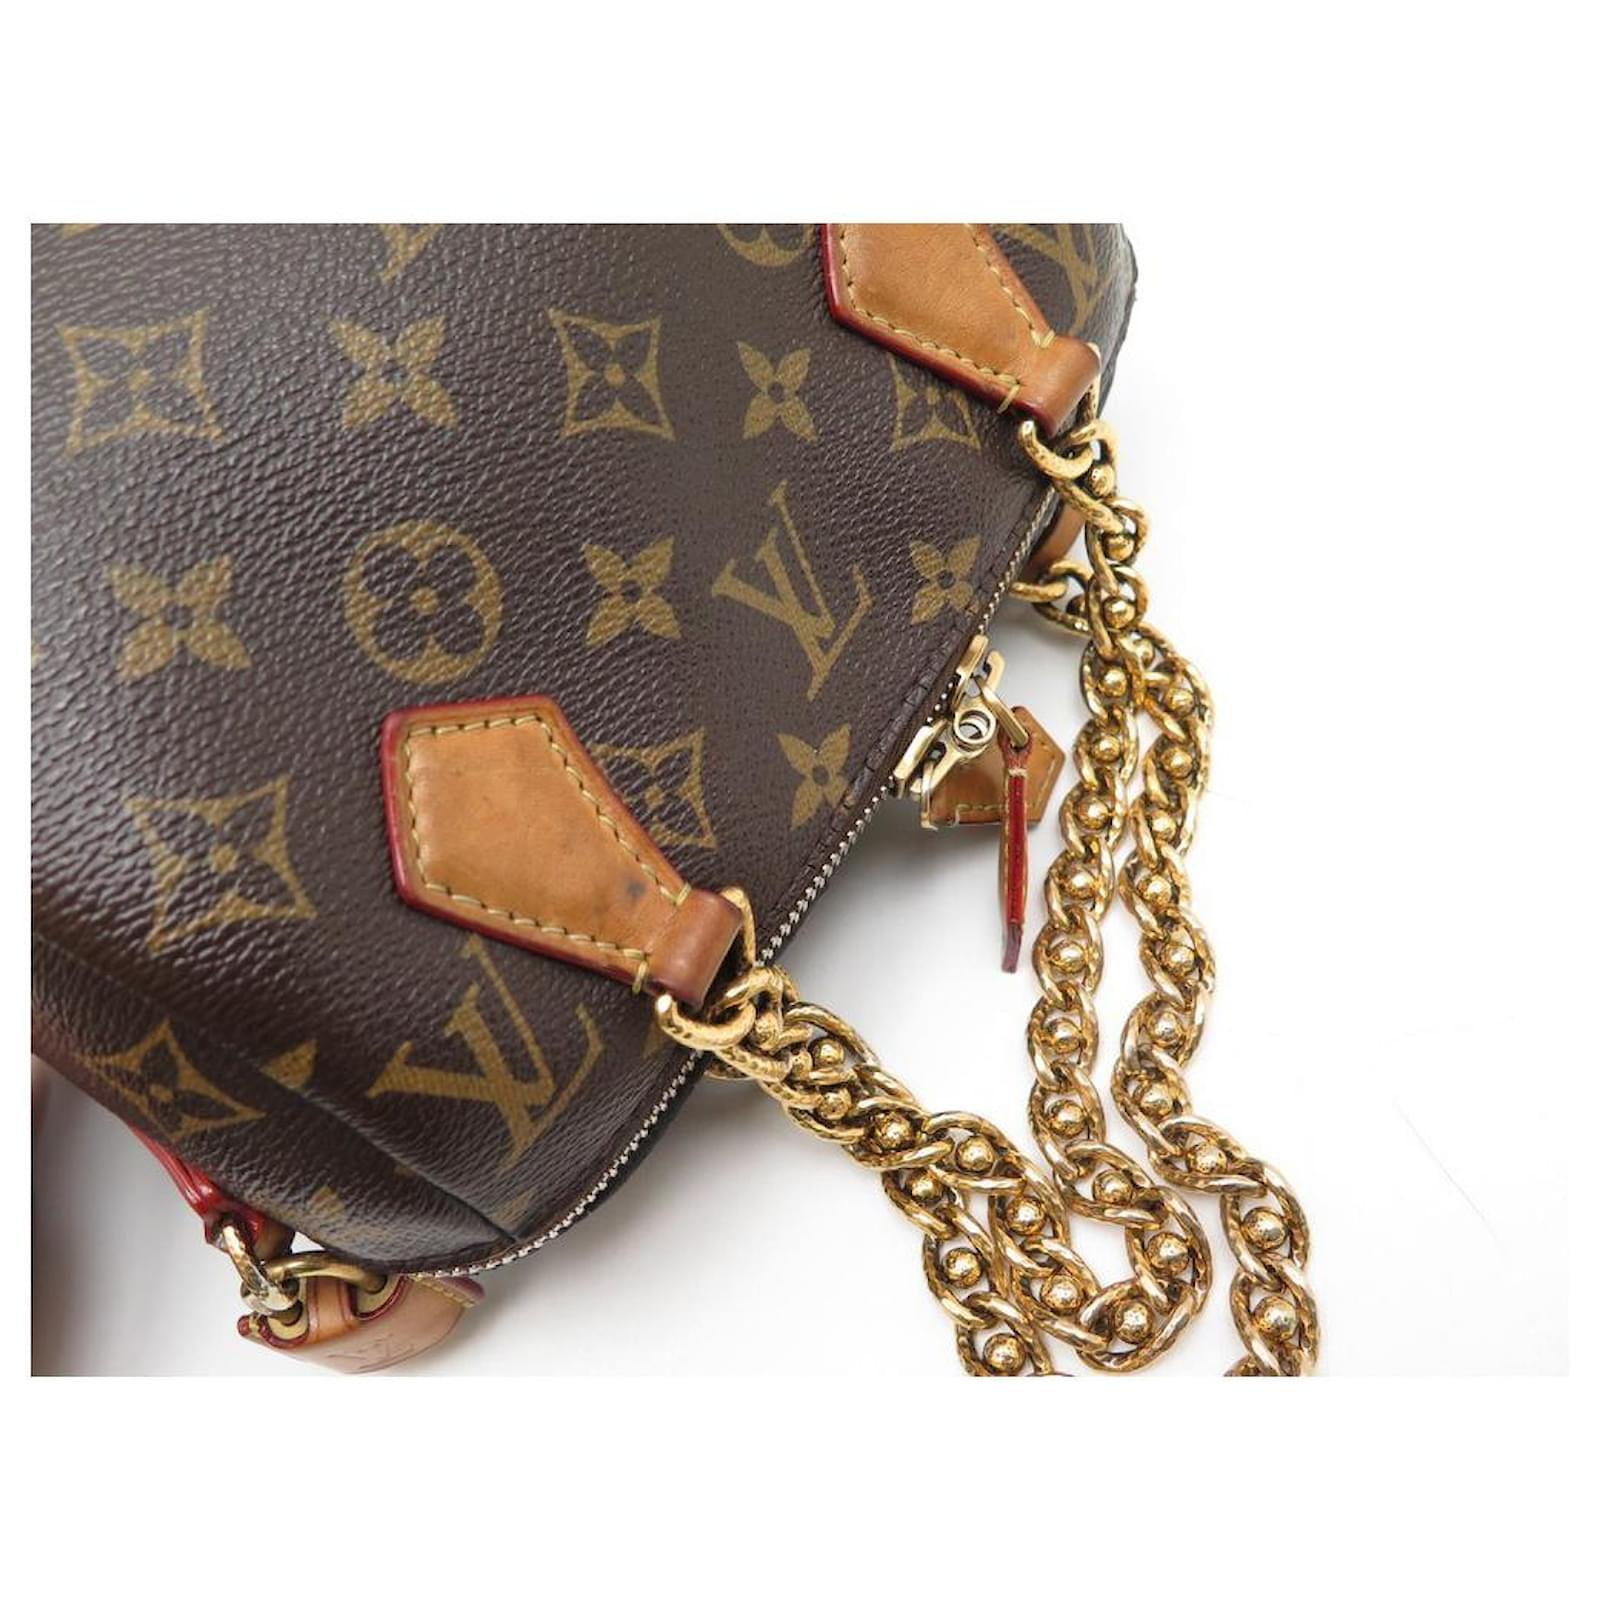 Louis Vuitton Monogram Speedy 20 Chain (2013) Reference Guide